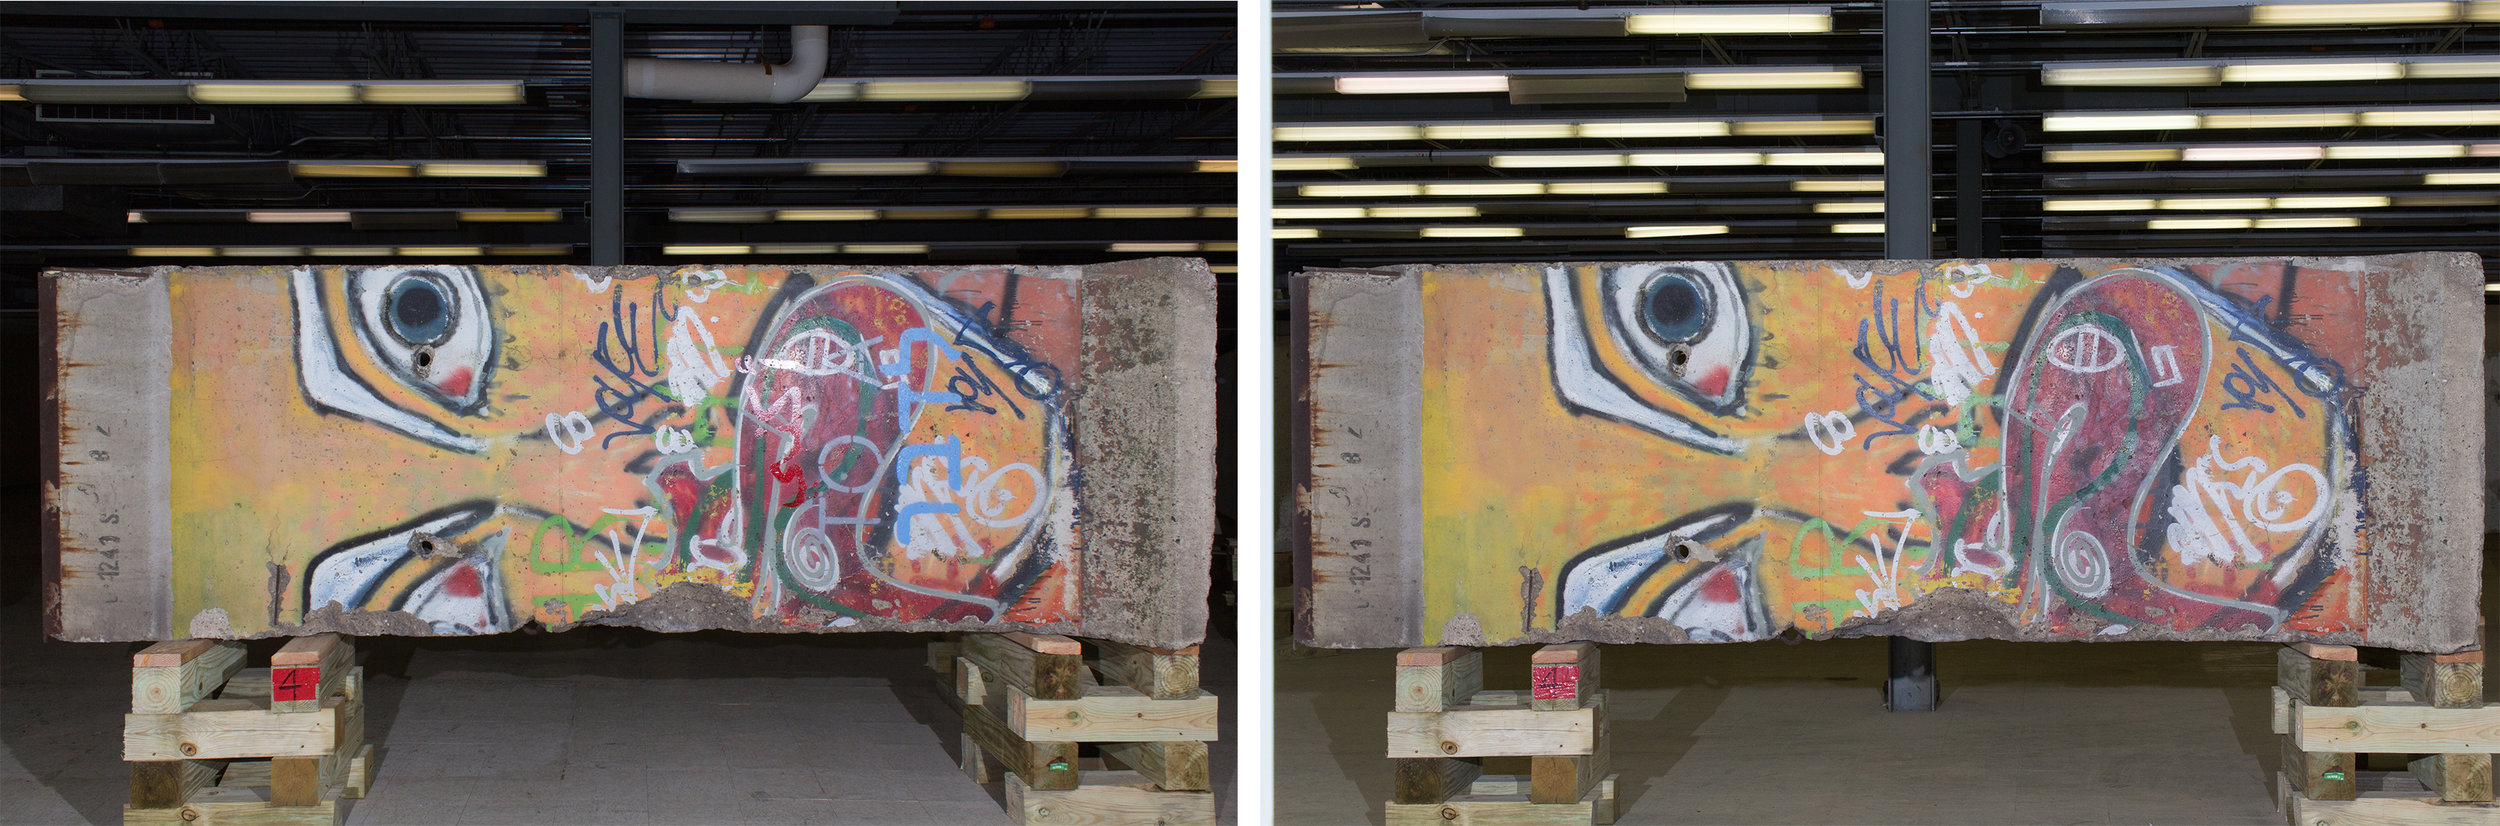  Segment 93.&nbsp;Before (left) and After conservation treatment (right).  Image © Katey Corda, 2015 